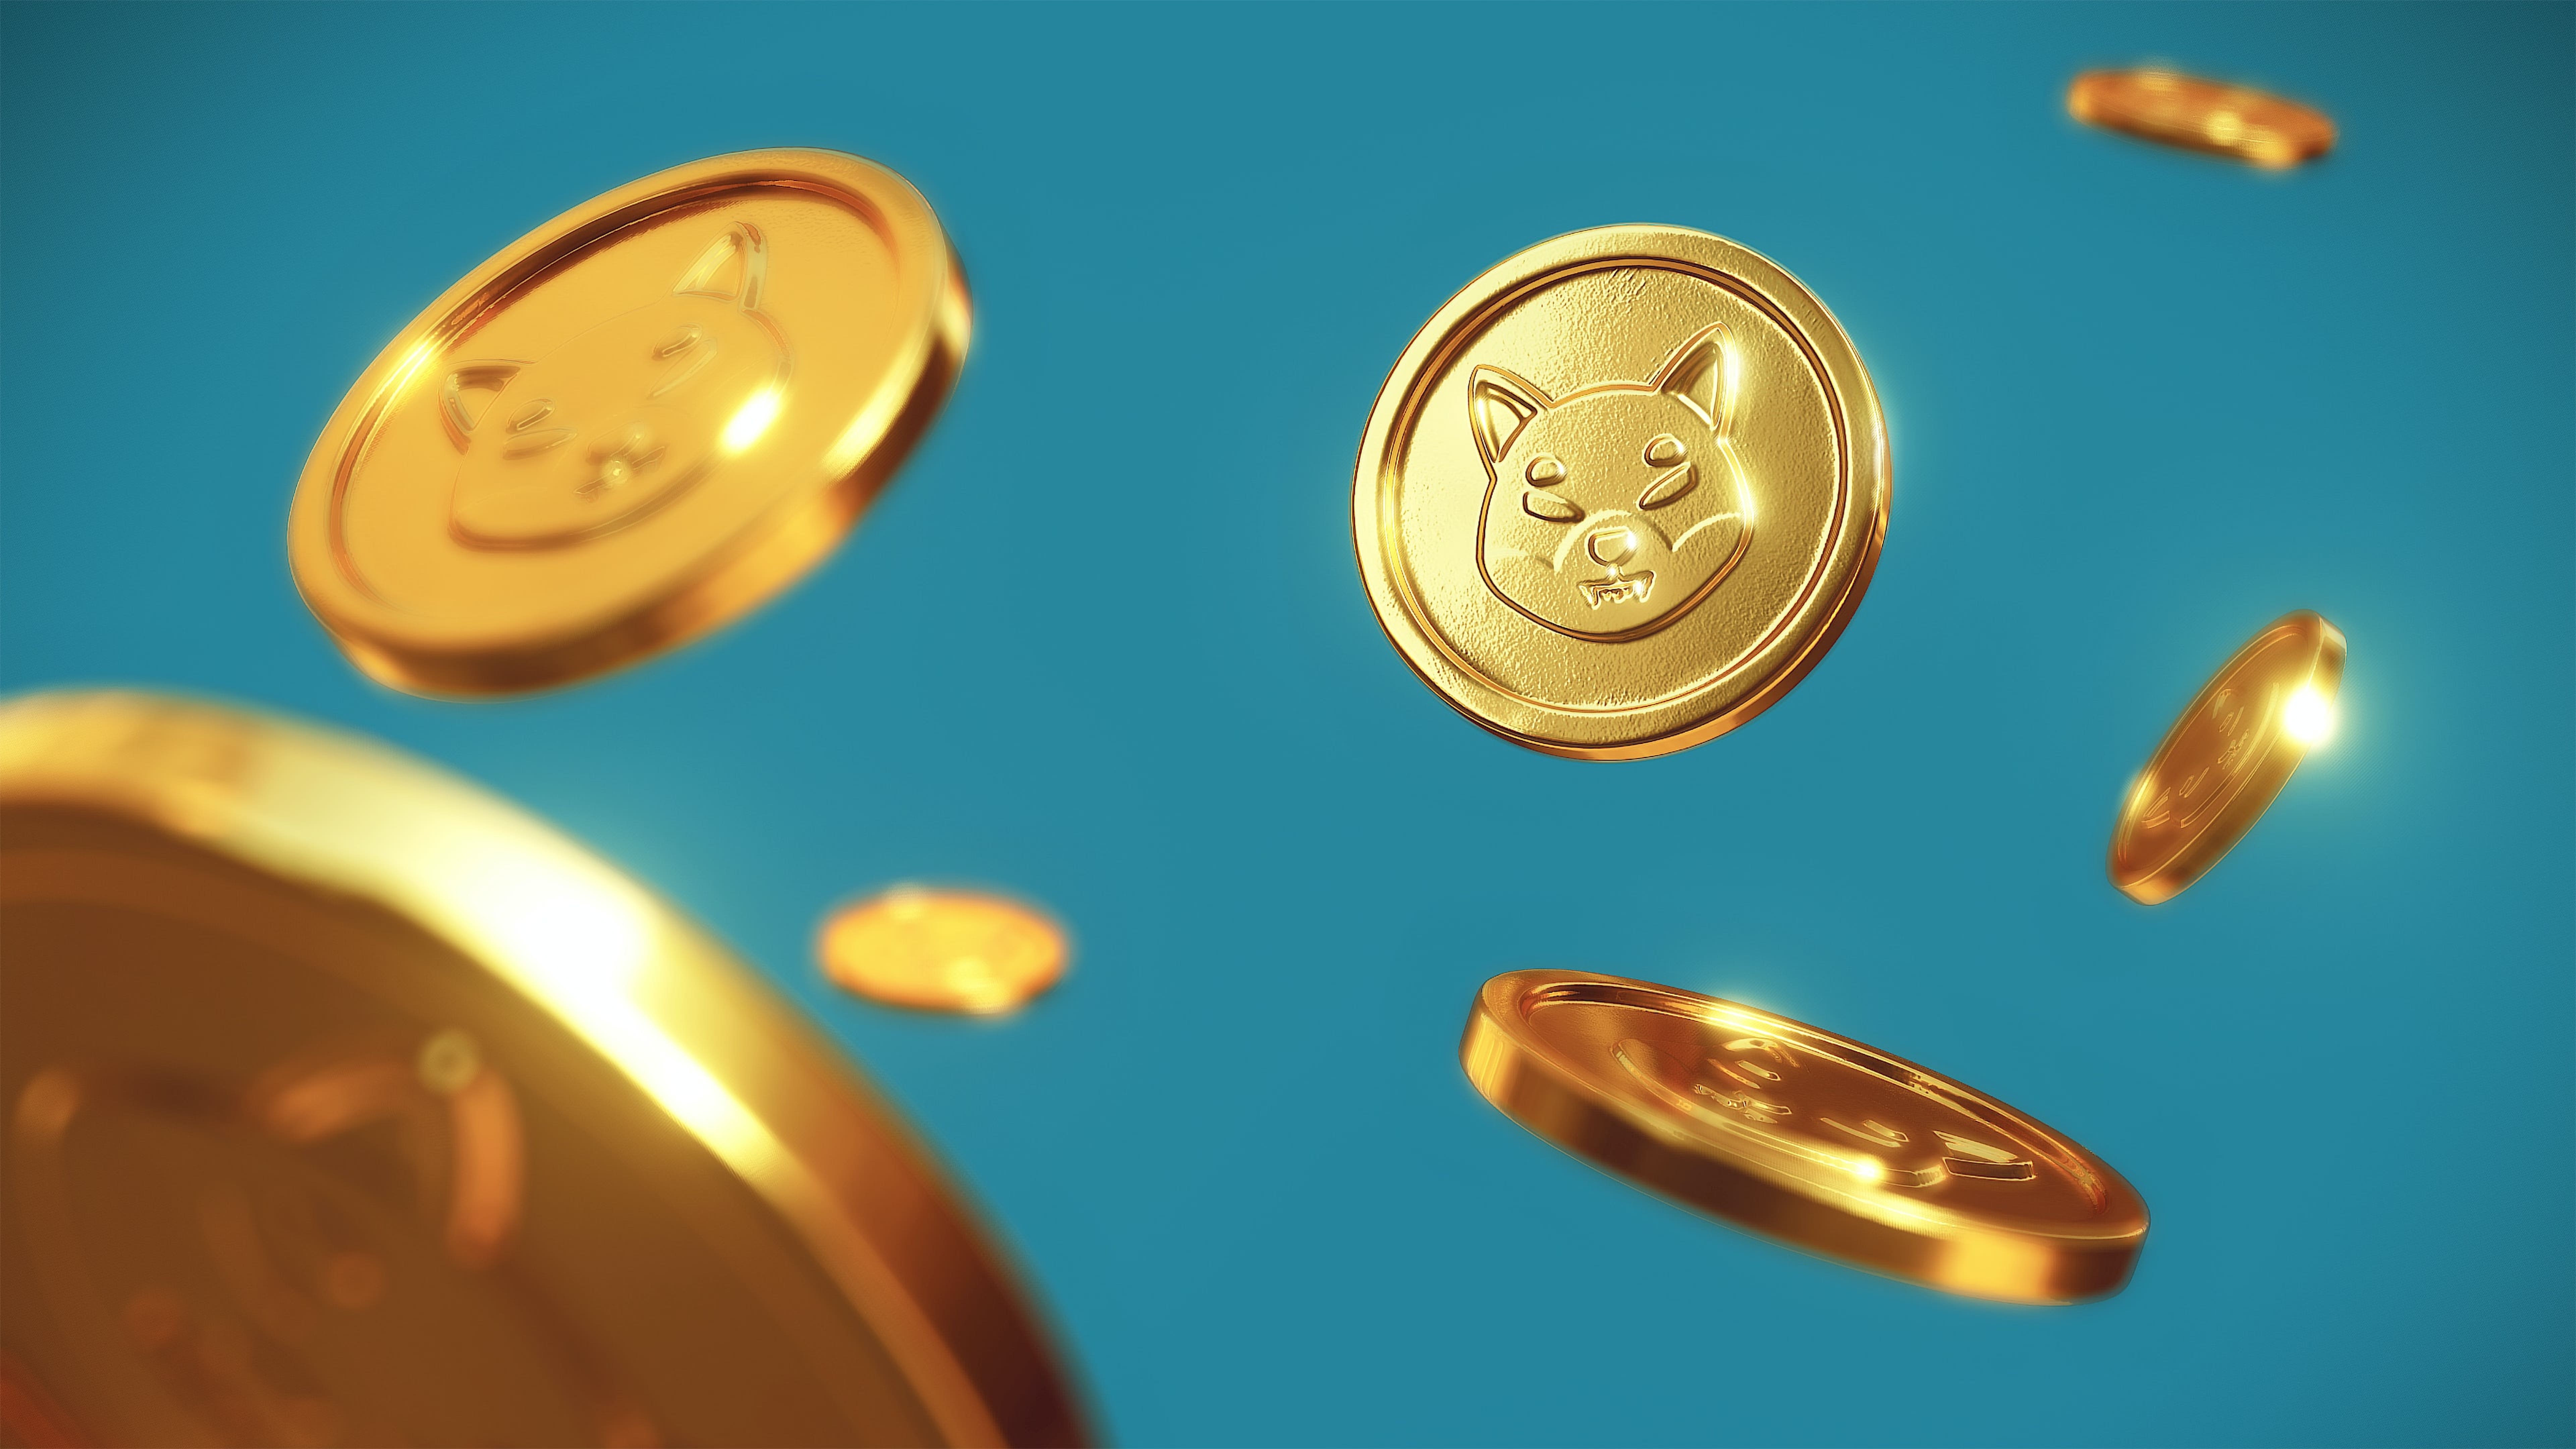 DOGE Co-Creator Explains Key Differences Between Shiba Inu And Dogecoin